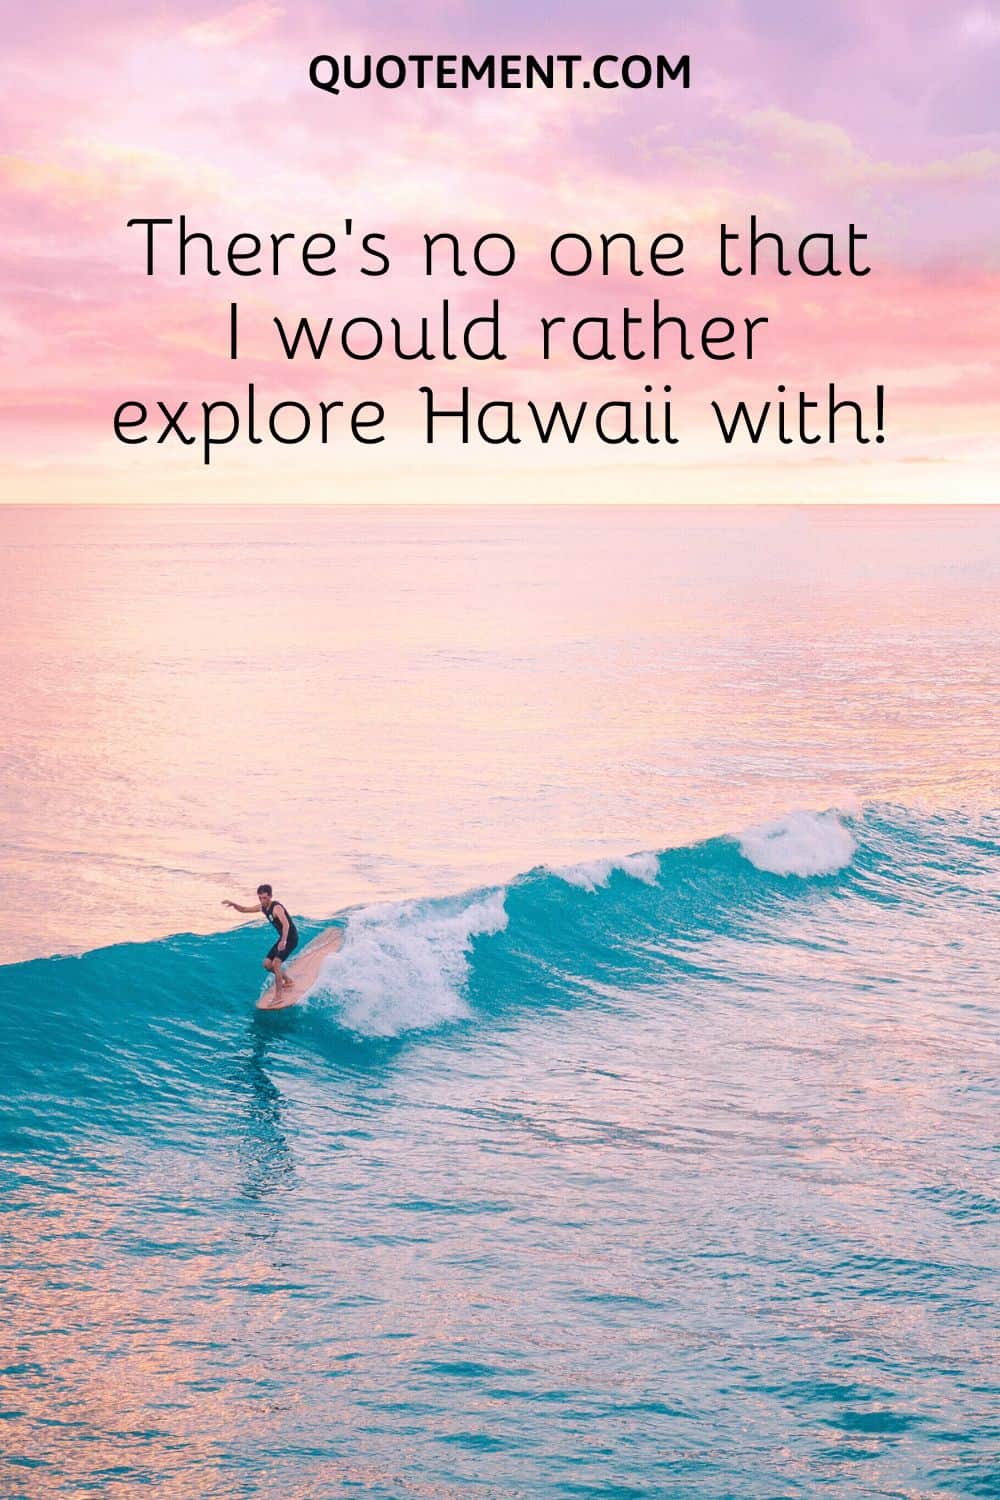 There’s no one that I would rather explore Hawaii with!